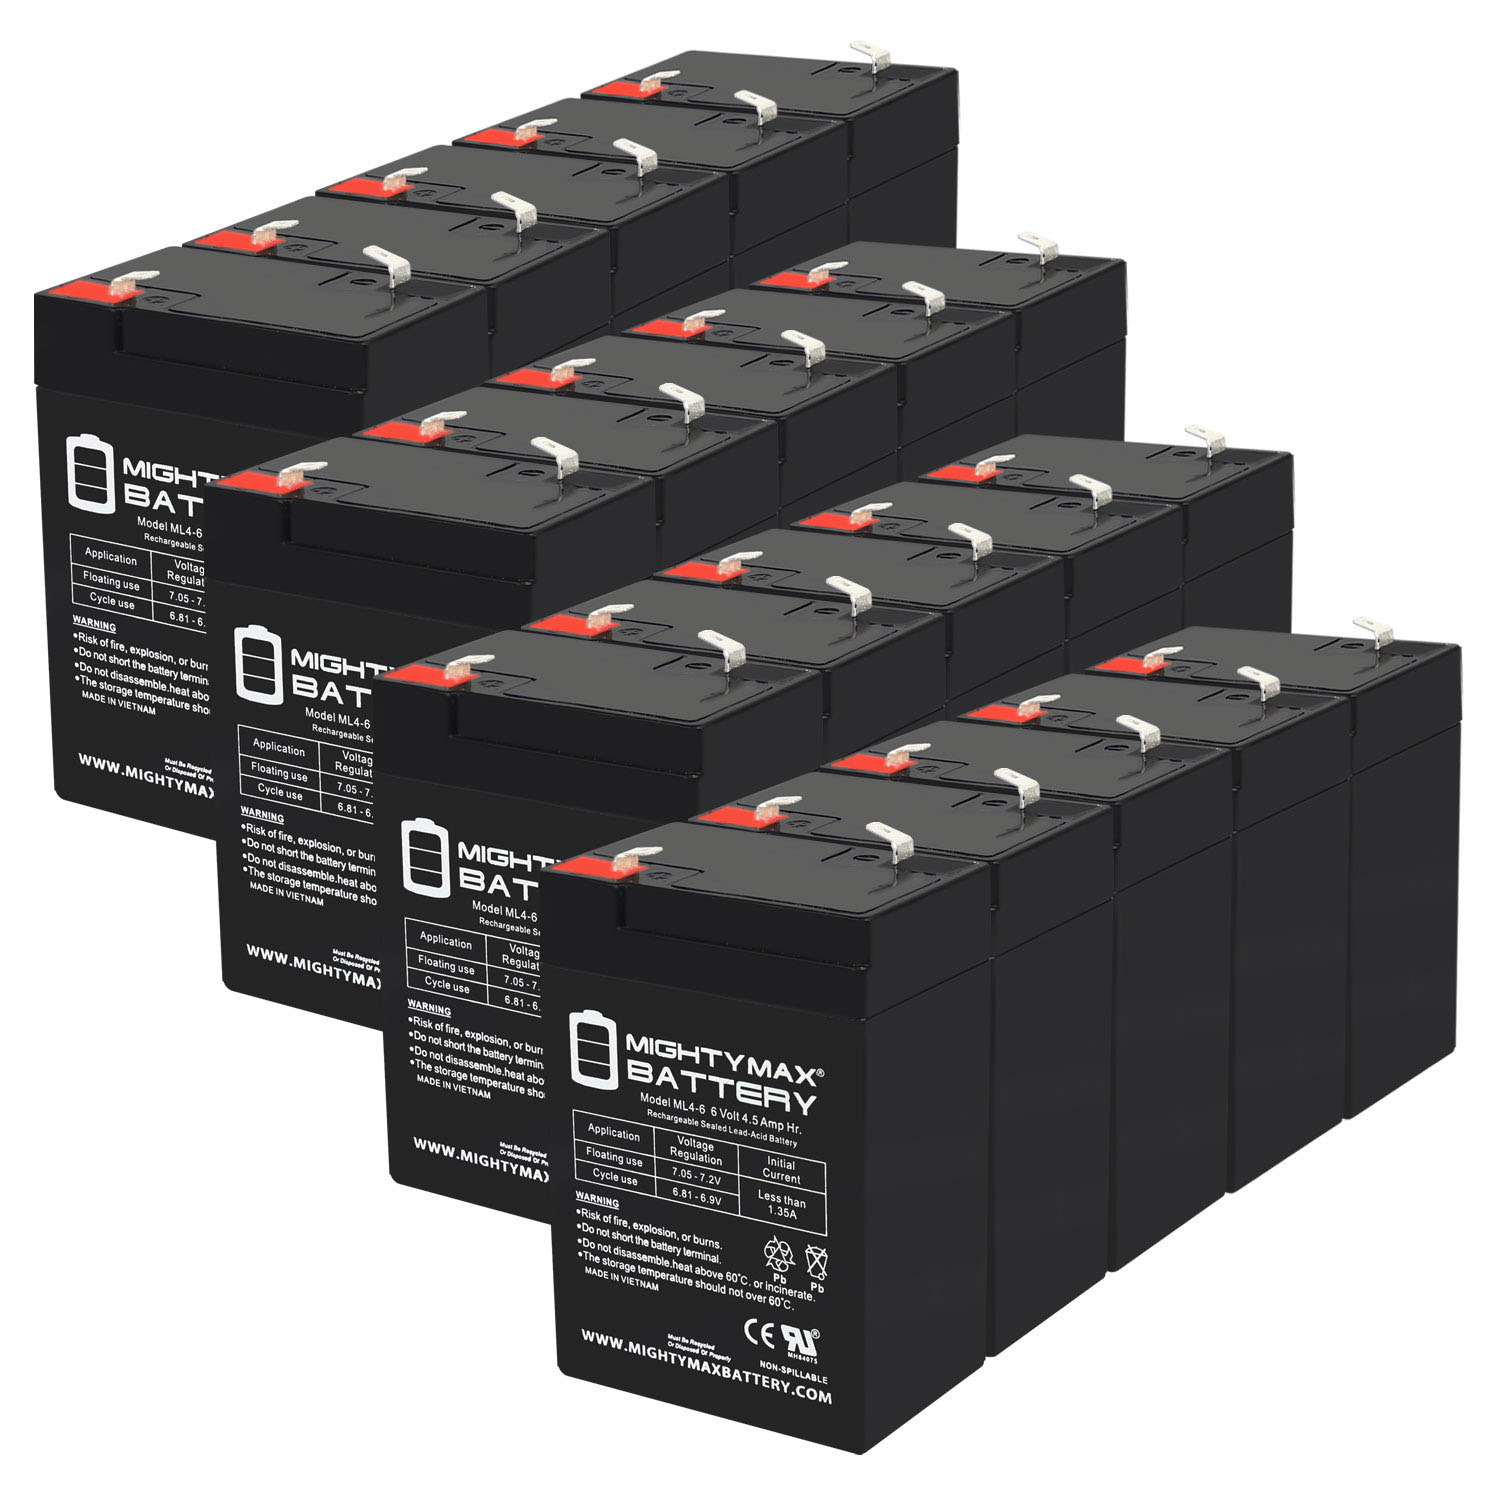 6V 4.5AH SLA Replacement Battery for Dual-Lite 12-225 - 20 Pack